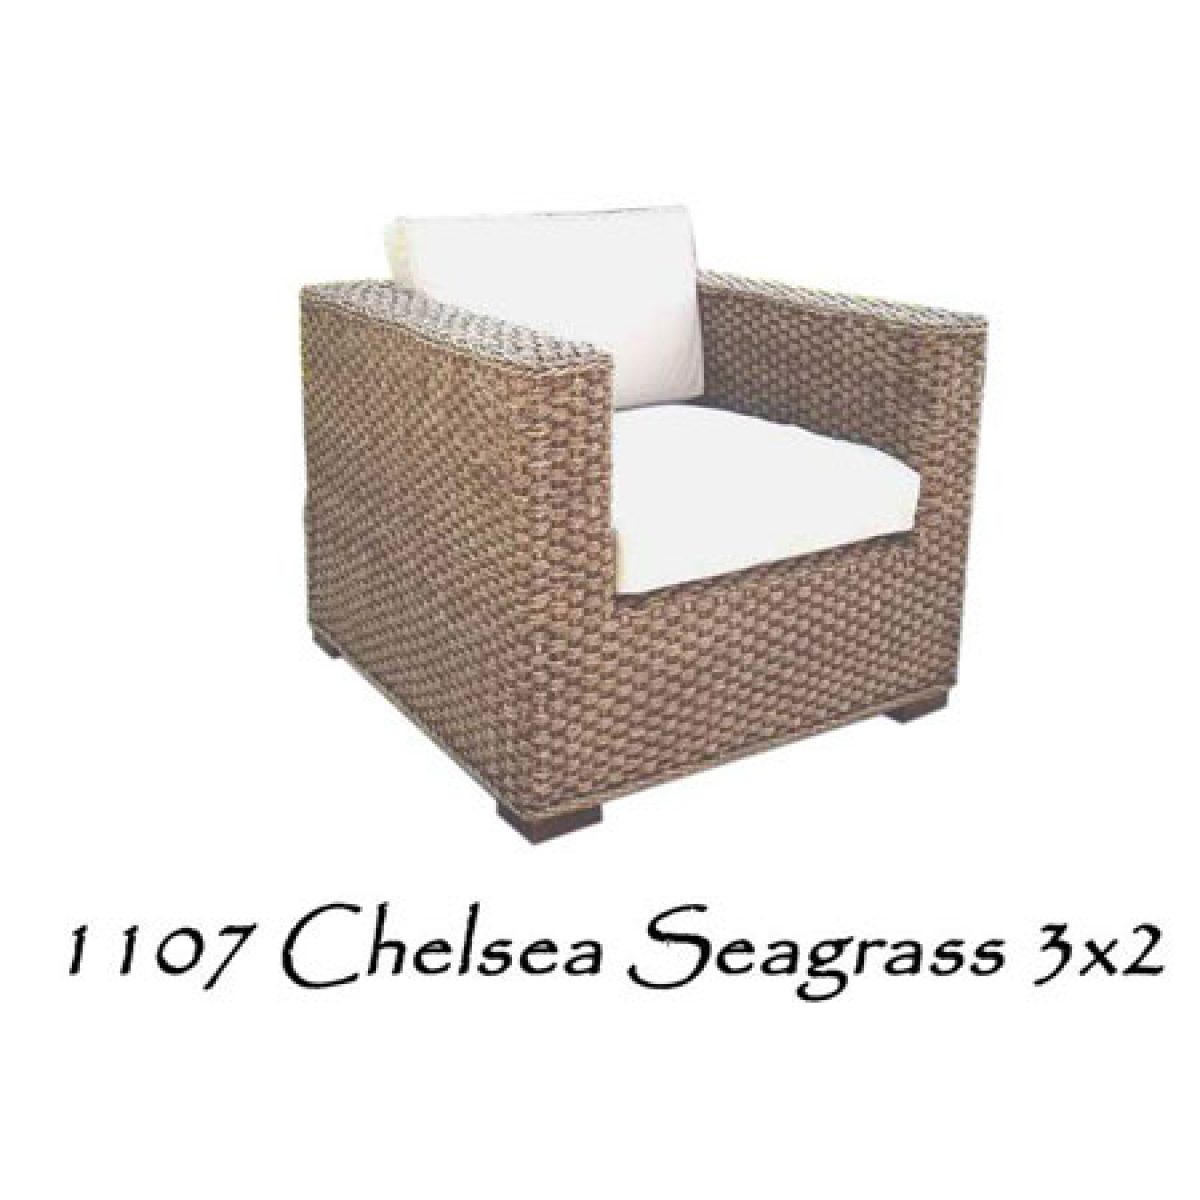 chelsea seagrass woven chair